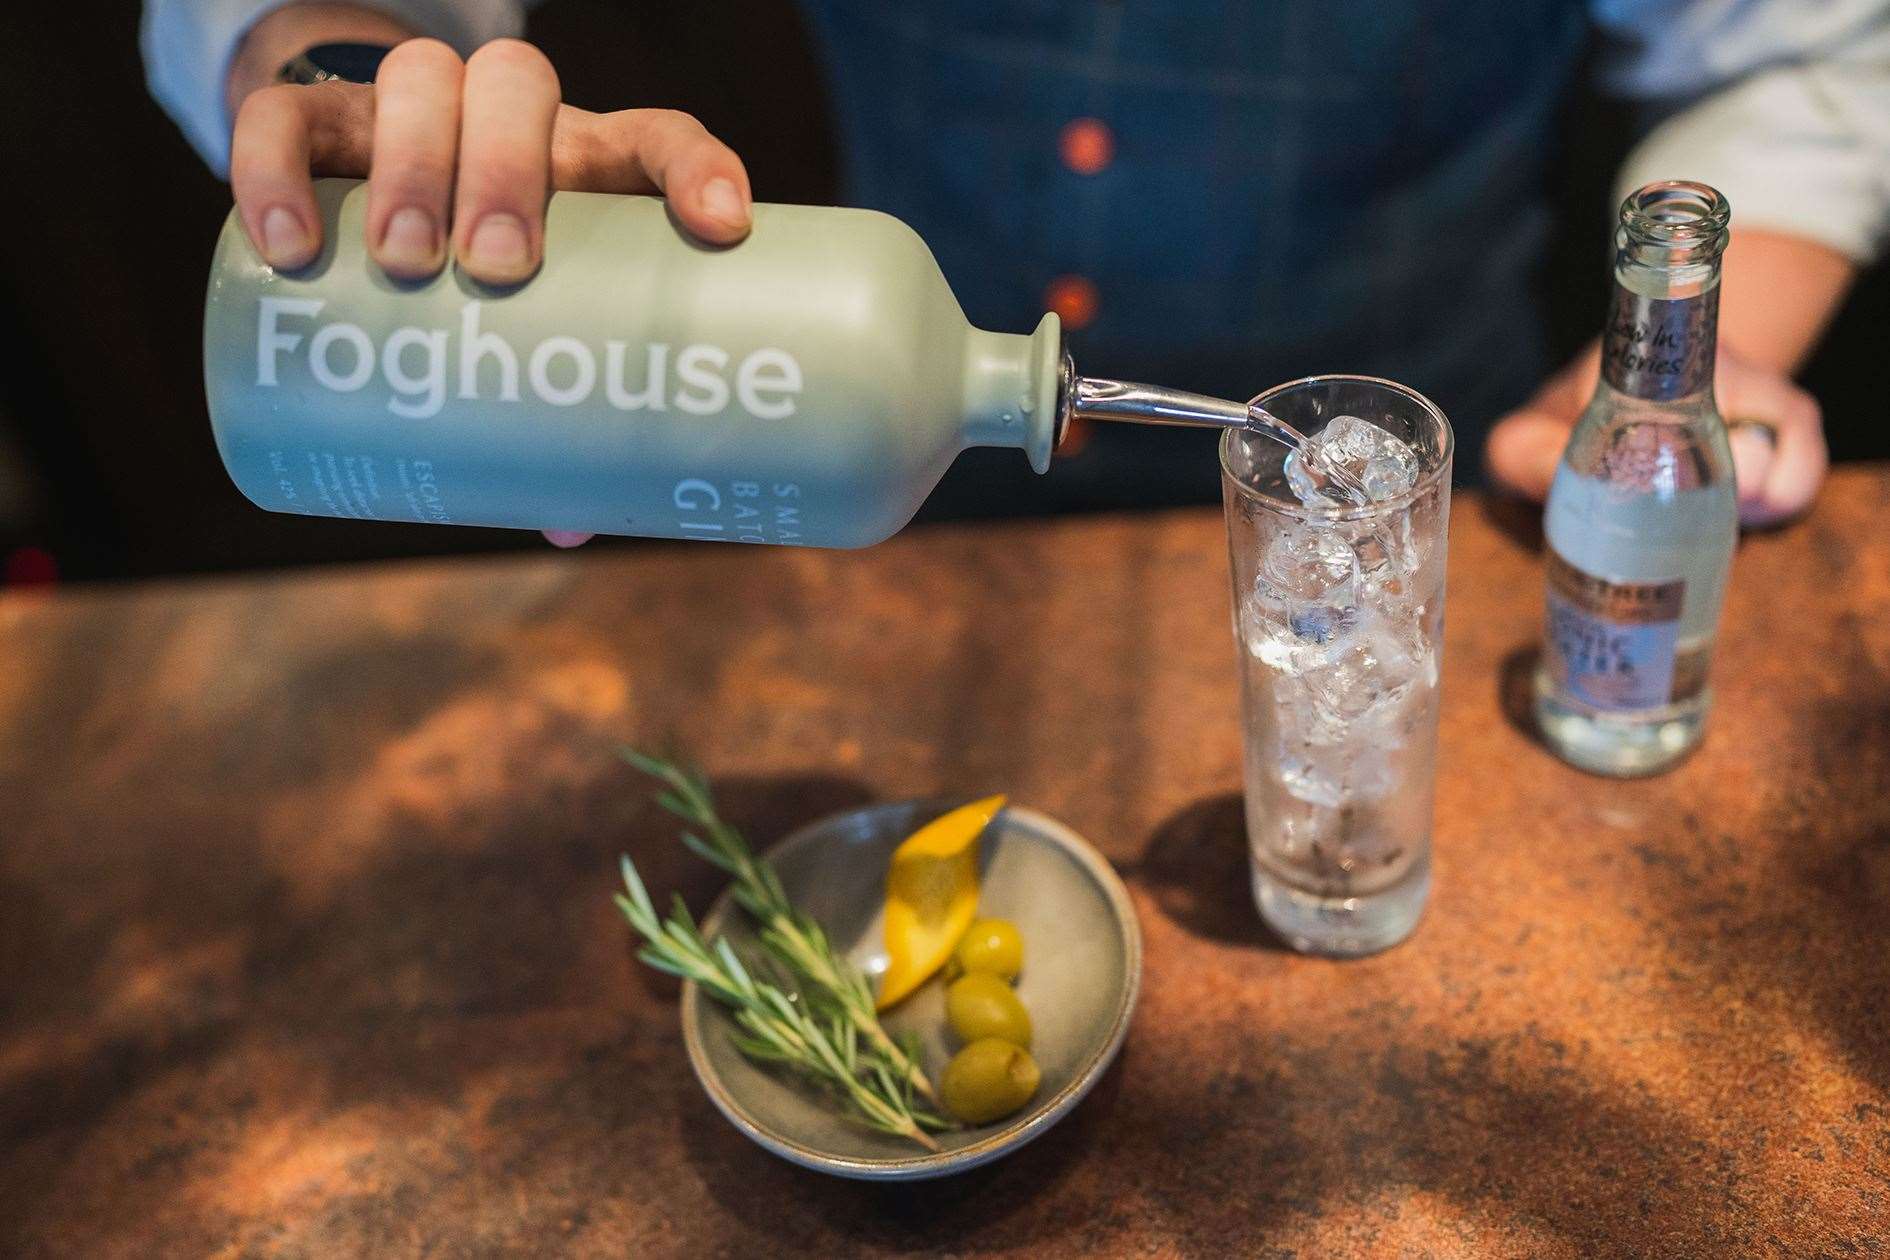 Enjoy the new Foghouse Gin with a garnish of Rosemary.